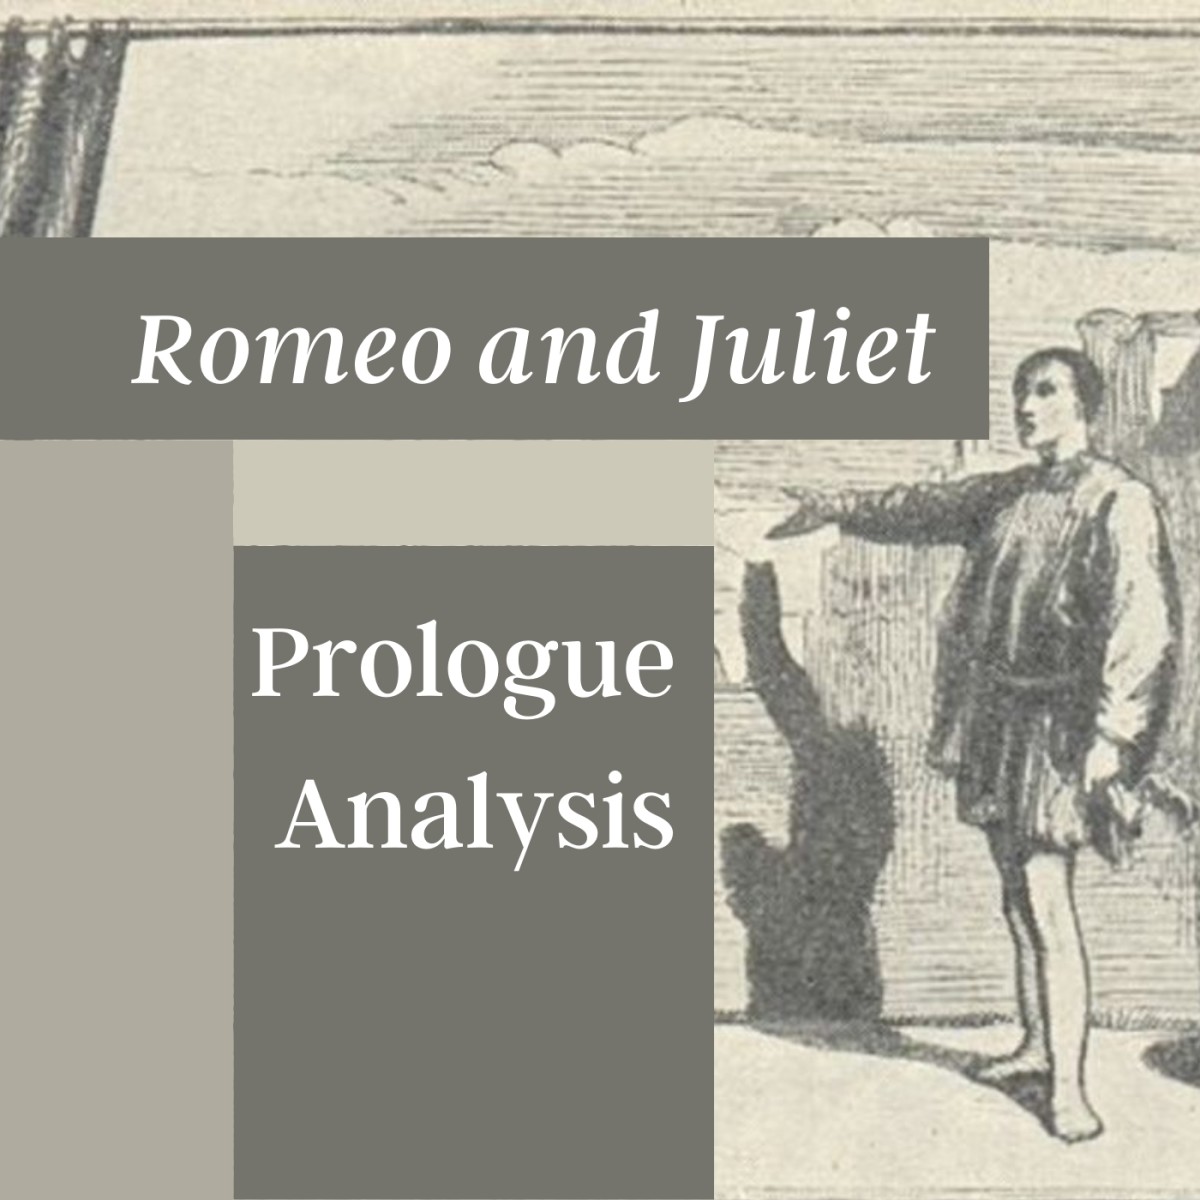 A line-by-line analysis of the prologue to "Romeo and Juliet"